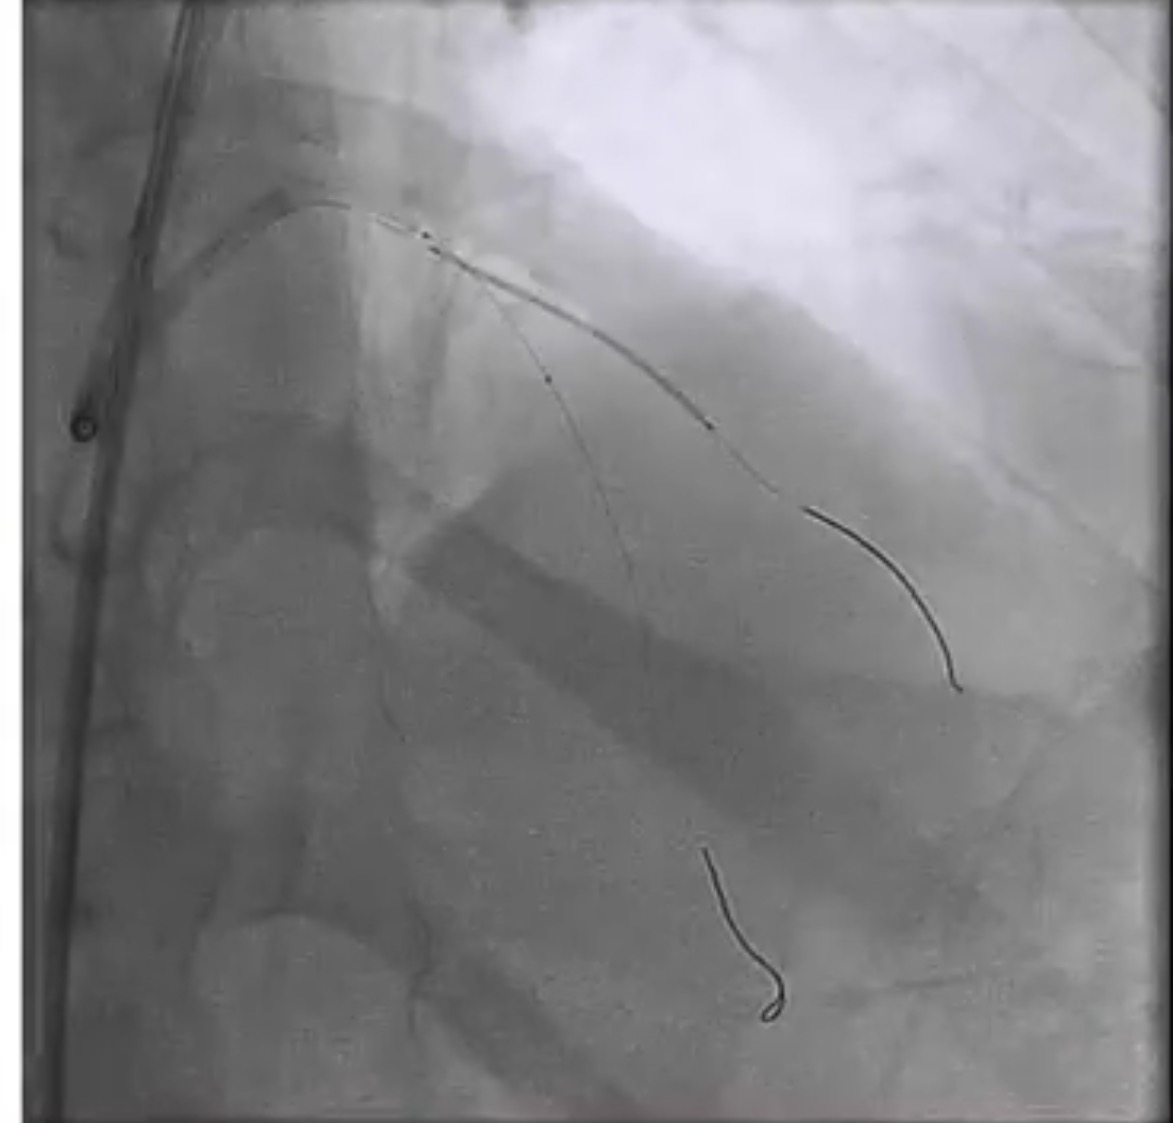 BALLLOON IN MAIN BRANCH AND DES STENT IN SIDE BRANCH